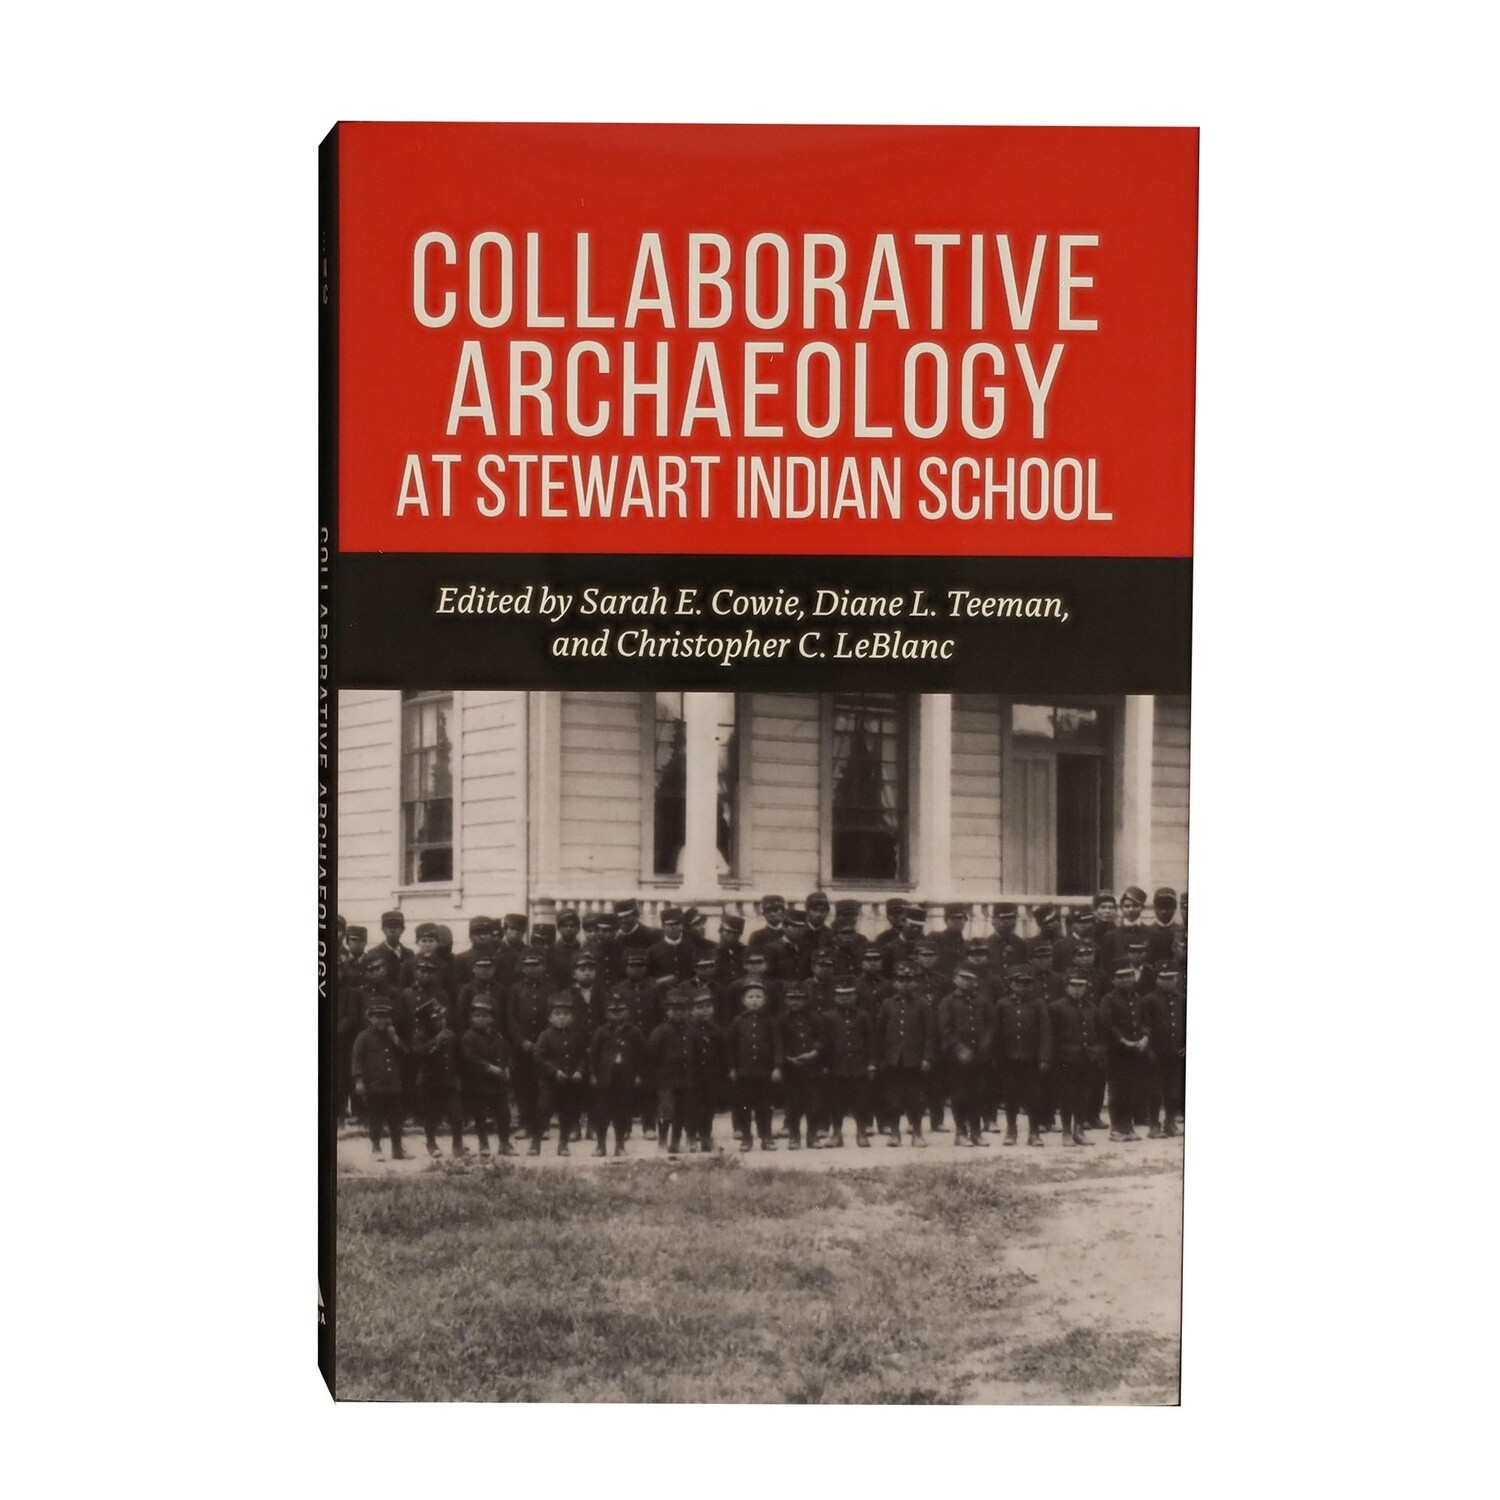 Collaborative Archaeology at Stewart Indian School